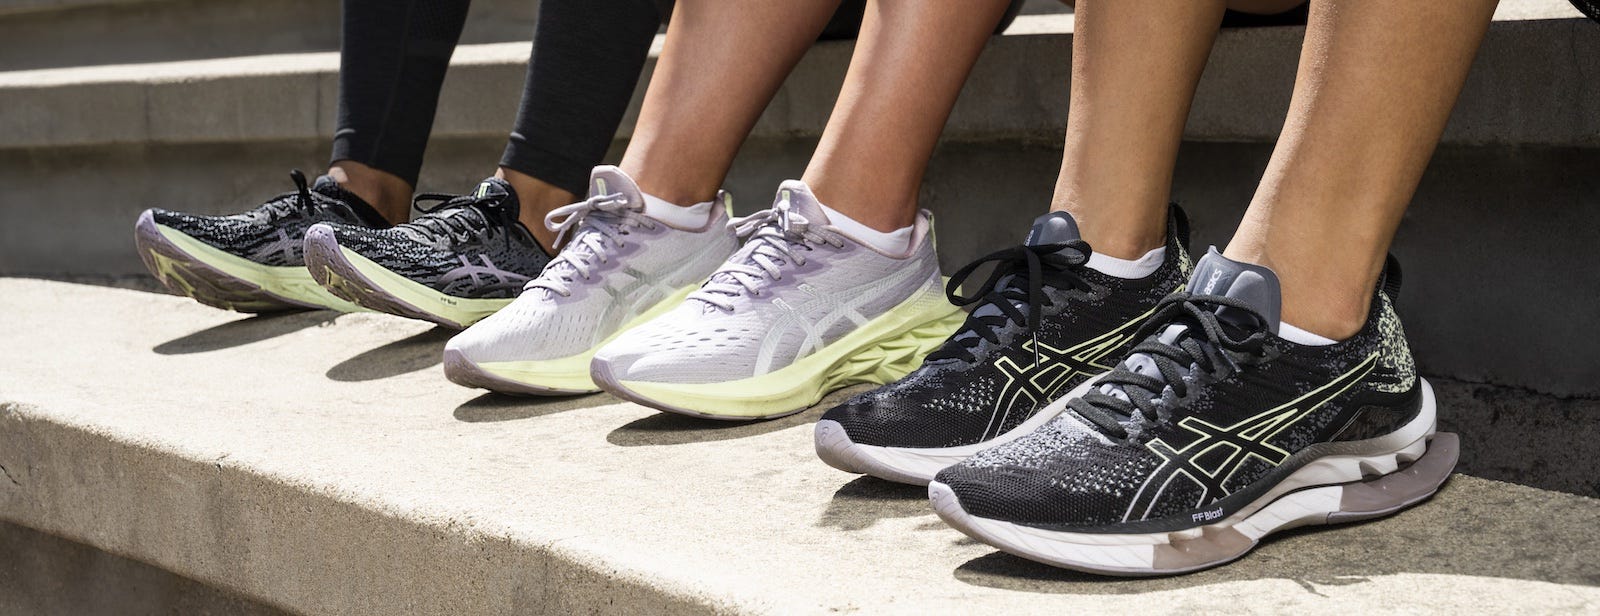 ASICS shoes evolution and history